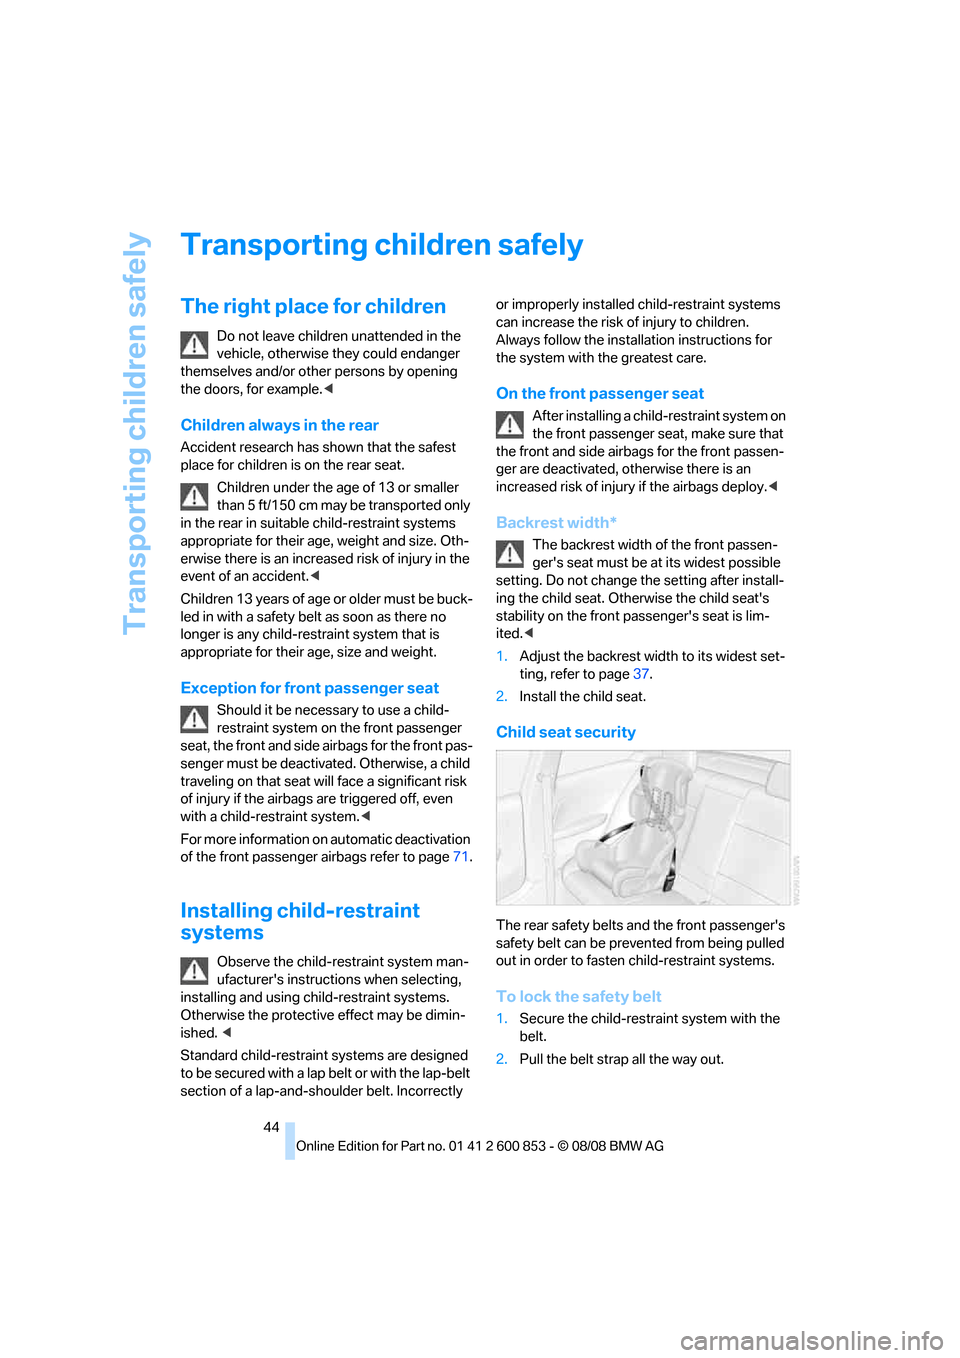 BMW 128I 2009 E81 Service Manual Transporting children safely
44
Transporting children safely
The right place for children
Do not leave children unattended in the 
vehicle, otherwise they could endanger 
themselves and/or other perso